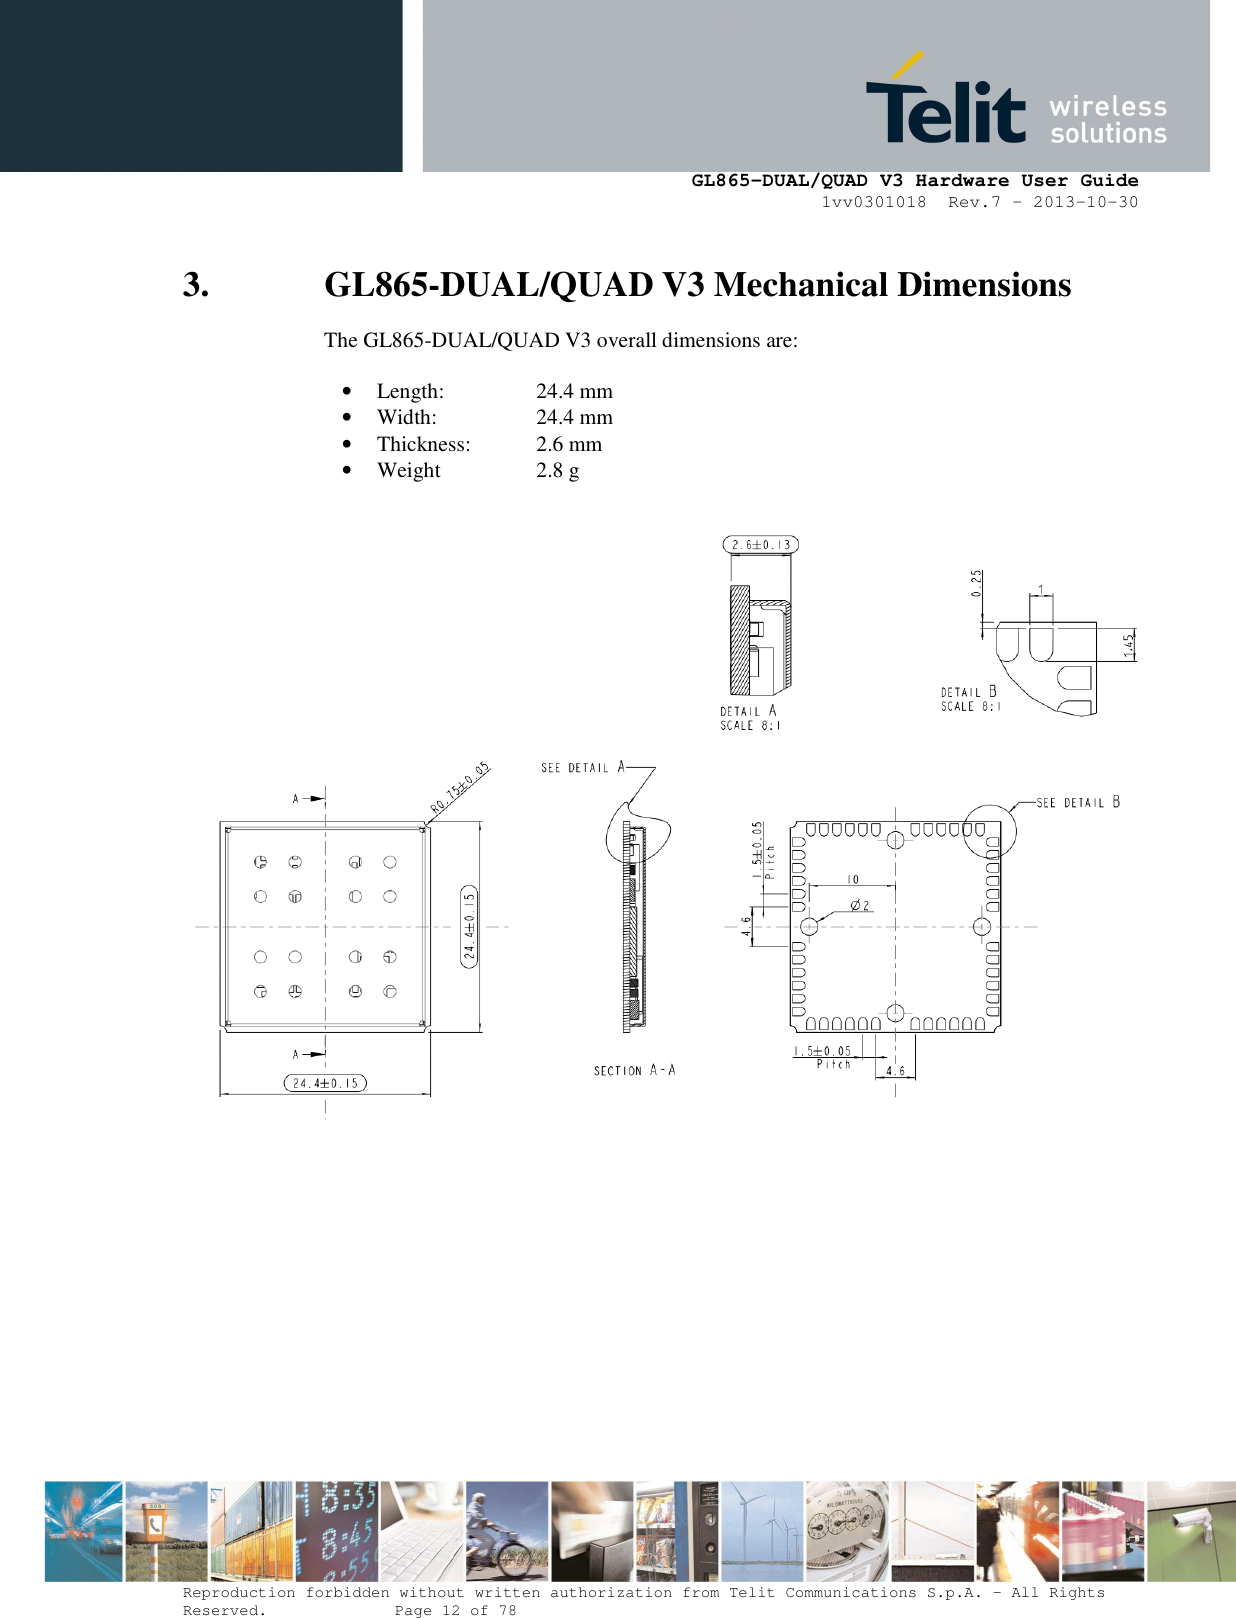      GL865-DUAL/QUAD V3 Hardware User Guide 1vv0301018  Rev.7 – 2013-10-30  Reproduction forbidden without written authorization from Telit Communications S.p.A. - All Rights Reserved.    Page 12 of 78 Mod. 0805 2011-07 Rev.2 3. GL865-DUAL/QUAD V3 Mechanical Dimensions The GL865-DUAL/QUAD V3 overall dimensions are:  • Length:     24.4 mm • Width:     24.4 mm  • Thickness:   2.6 mm • Weight    2.8 g     